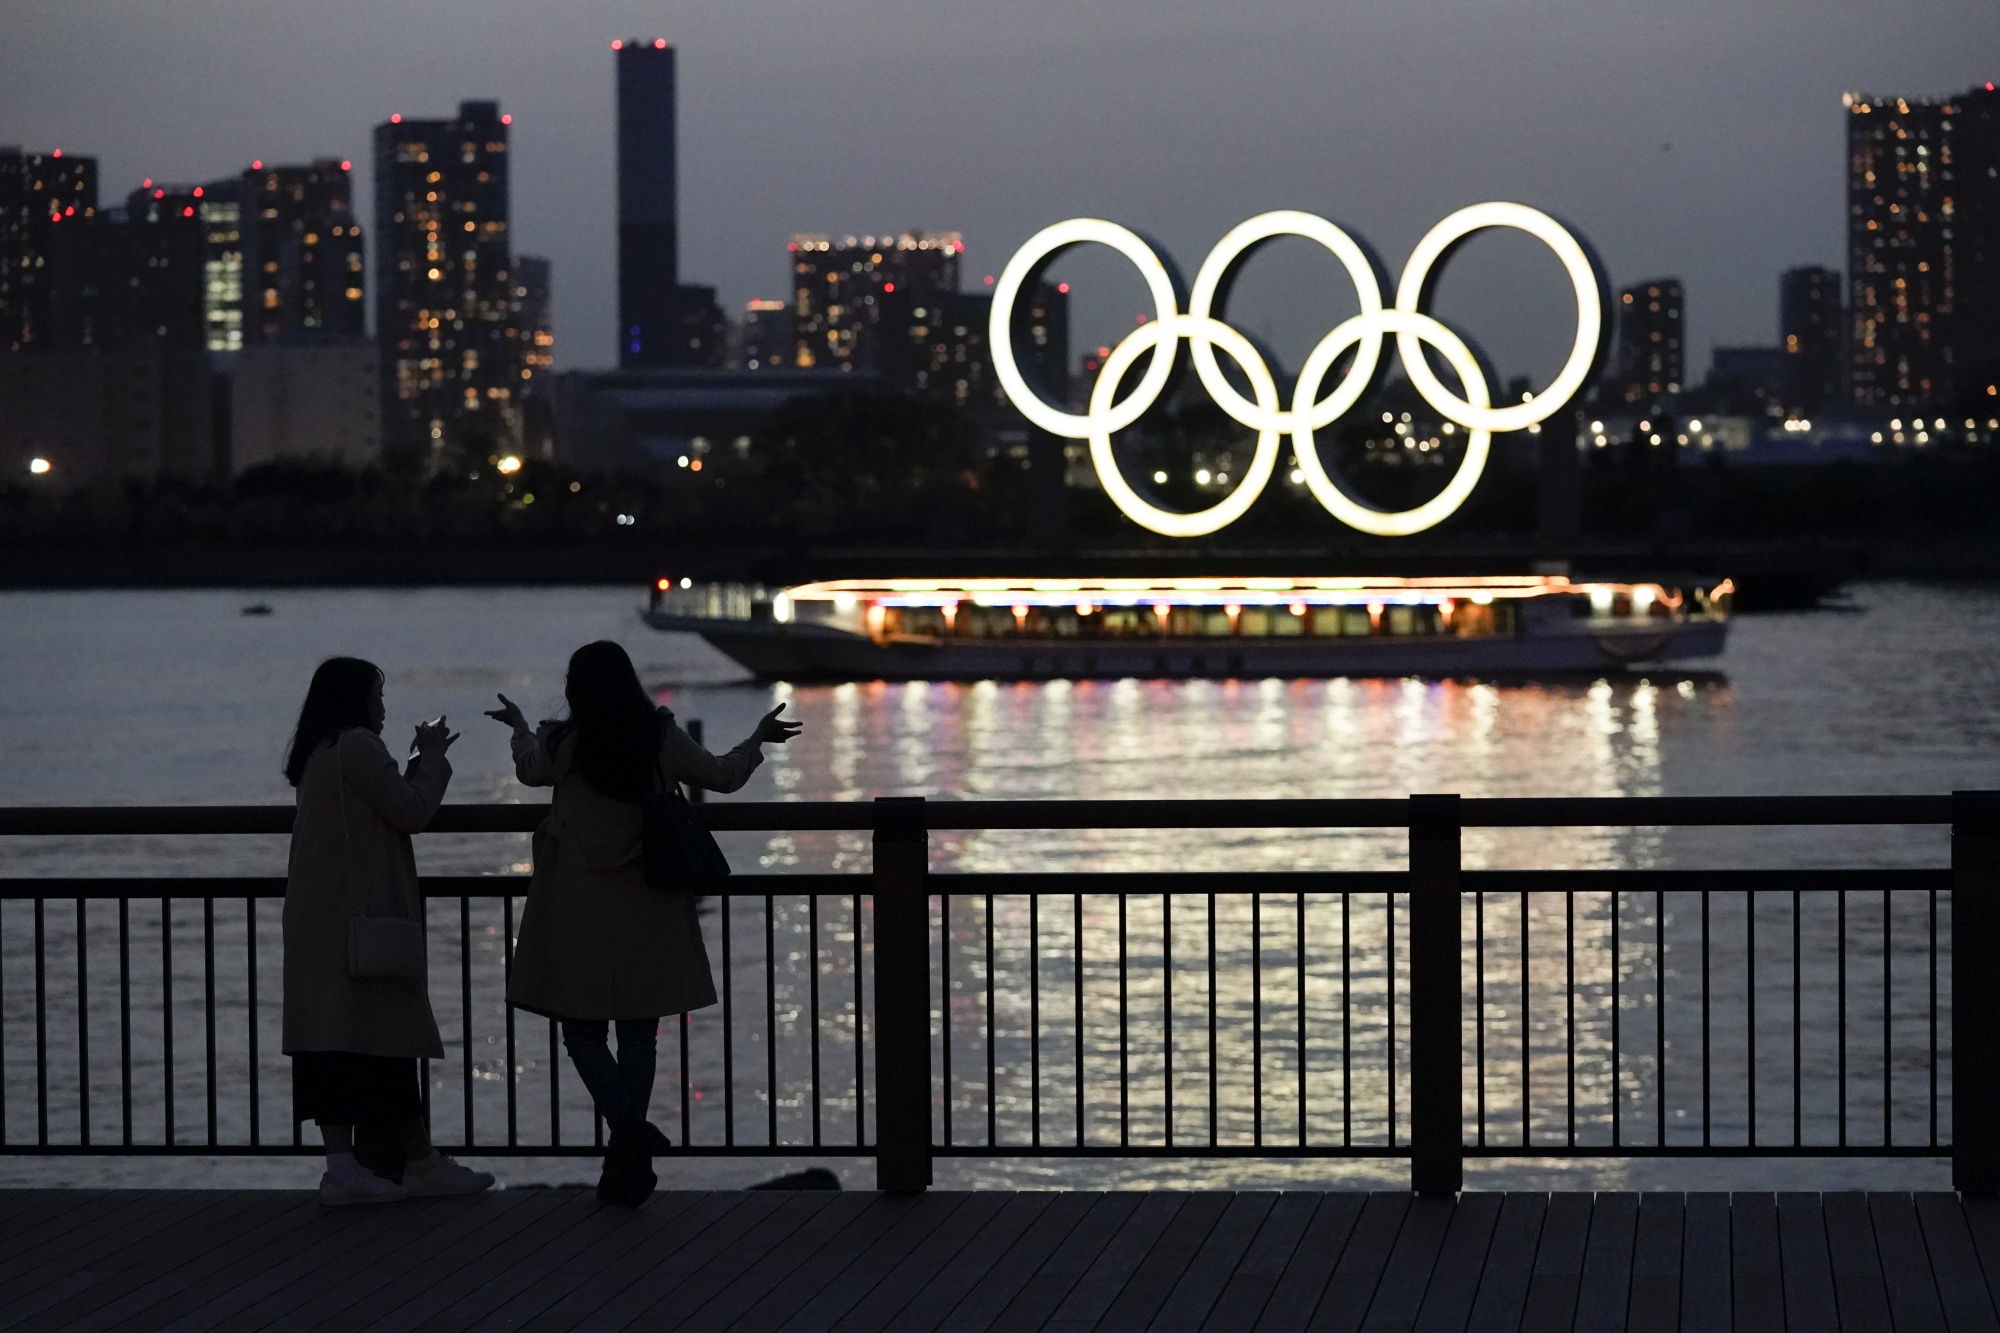 The&nbsp;illuminated Olympic rings floating in the waters off Odaiba island in Tokyo, Japan.&nbsp;